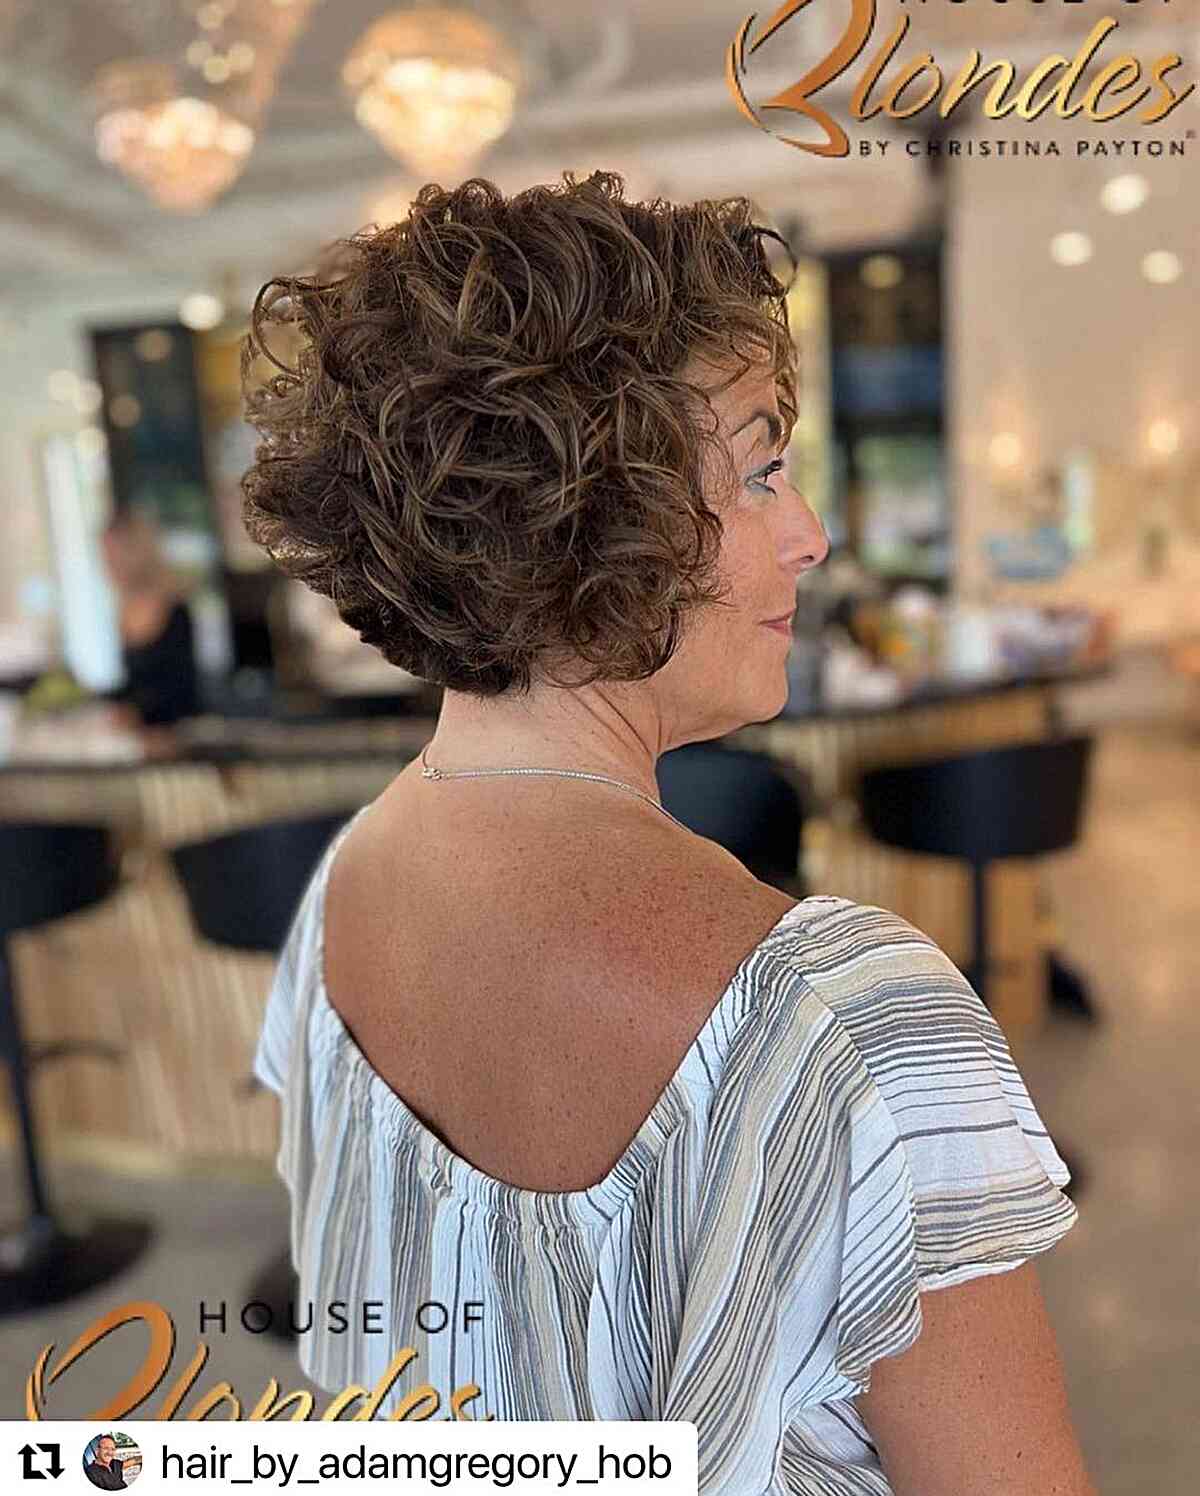 Chestnut Brown on Short Graduated Curly Bob for Ladies Aged 60